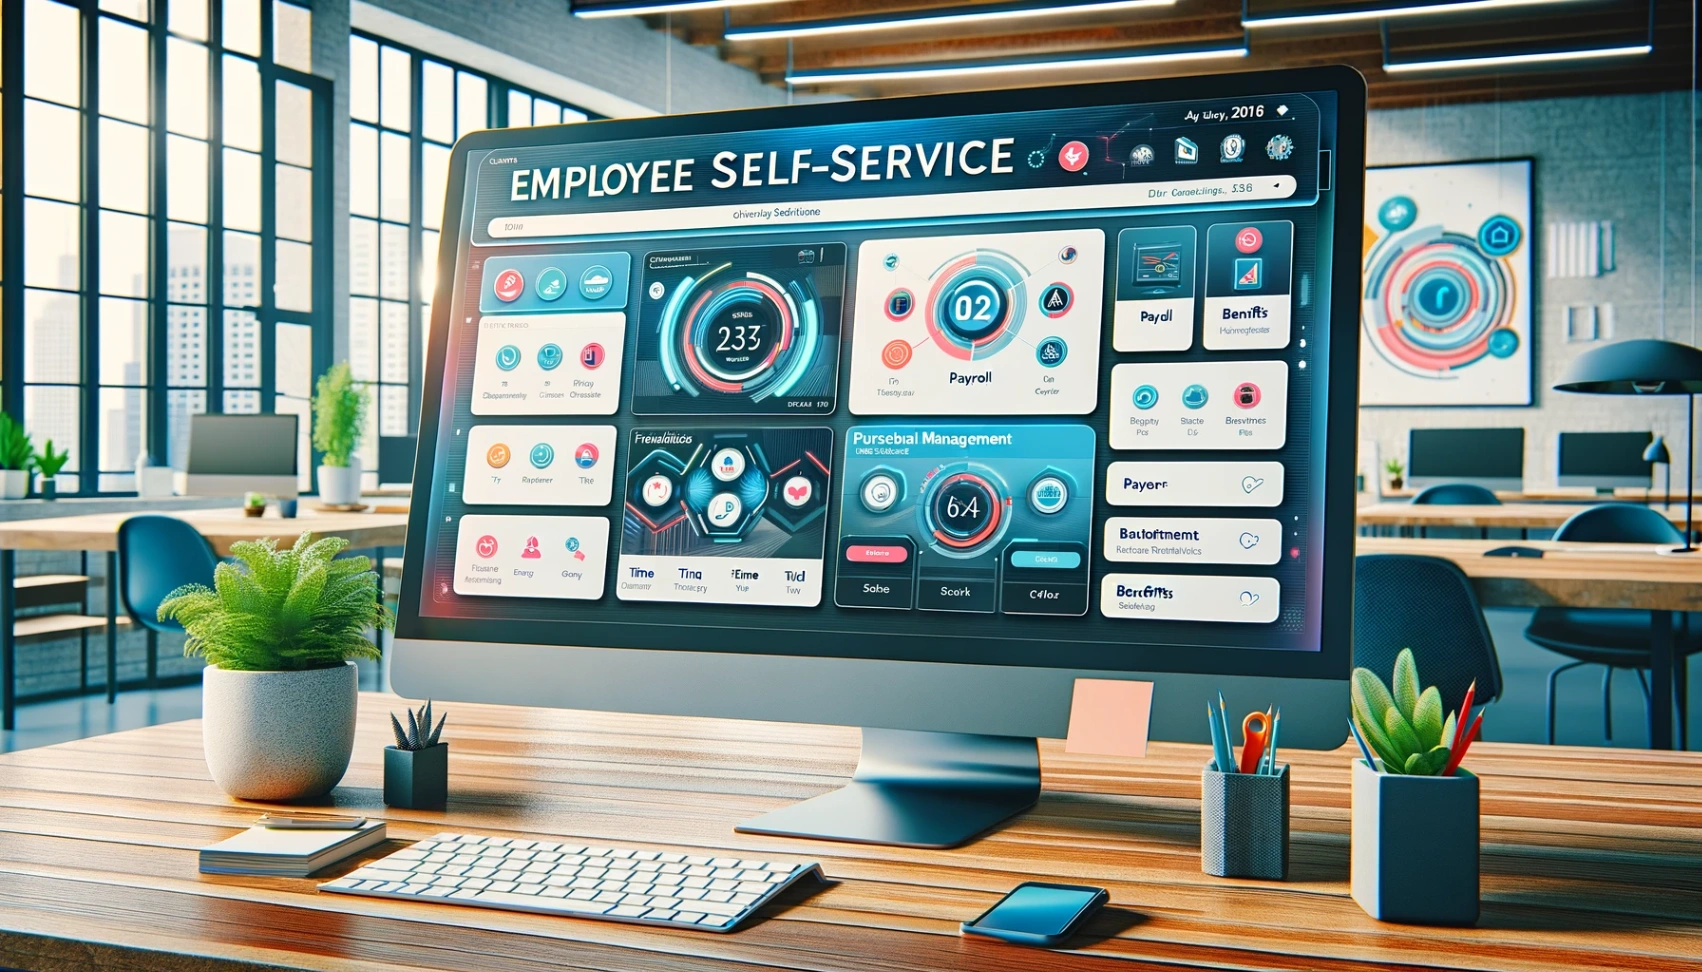 Paycom: Employee Self-Service Online - How to Apply